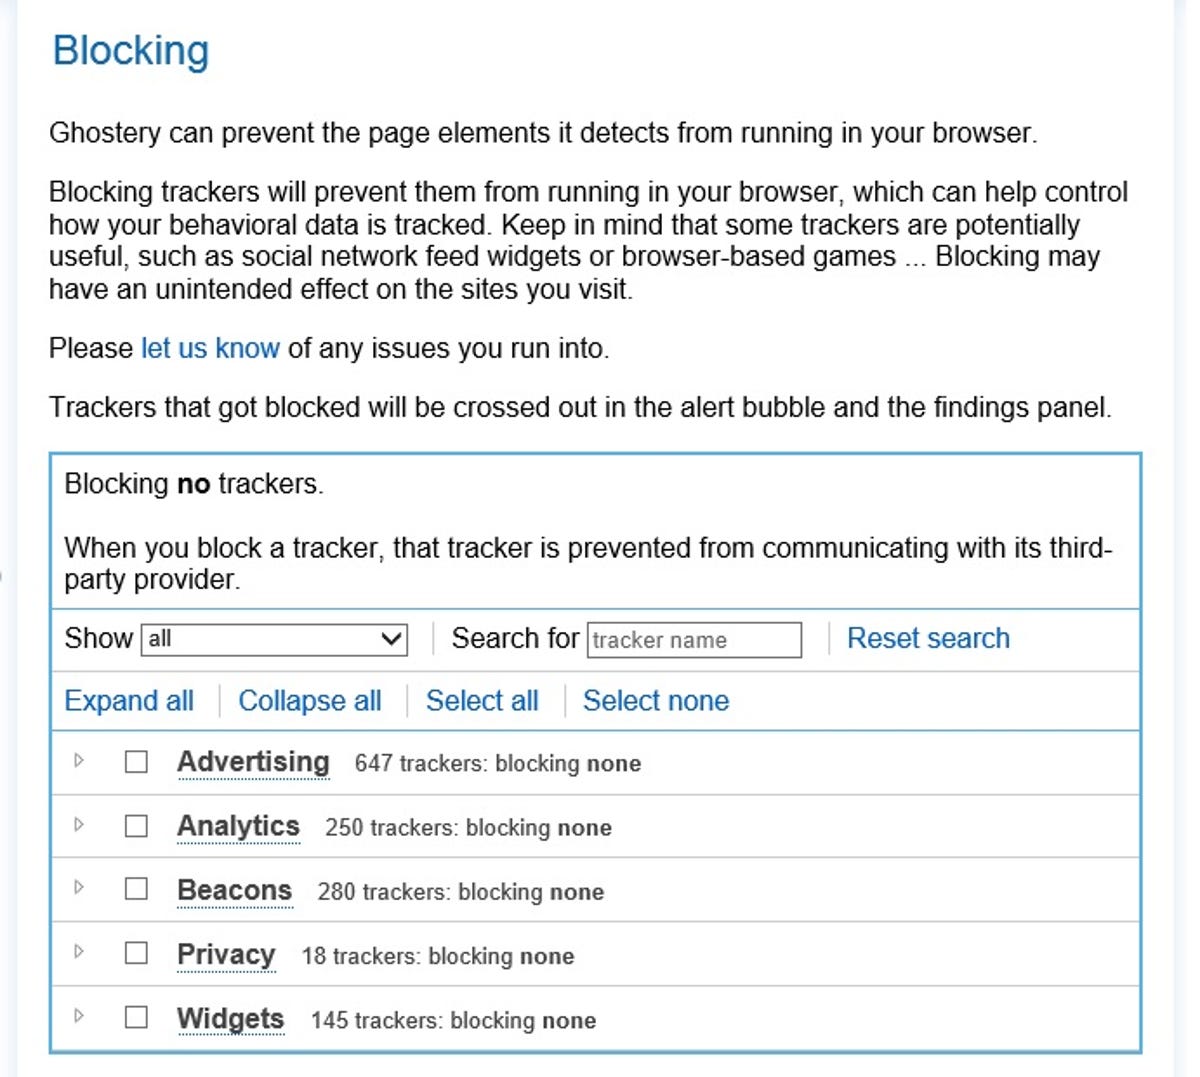 Ghostery installation wizard blocking options